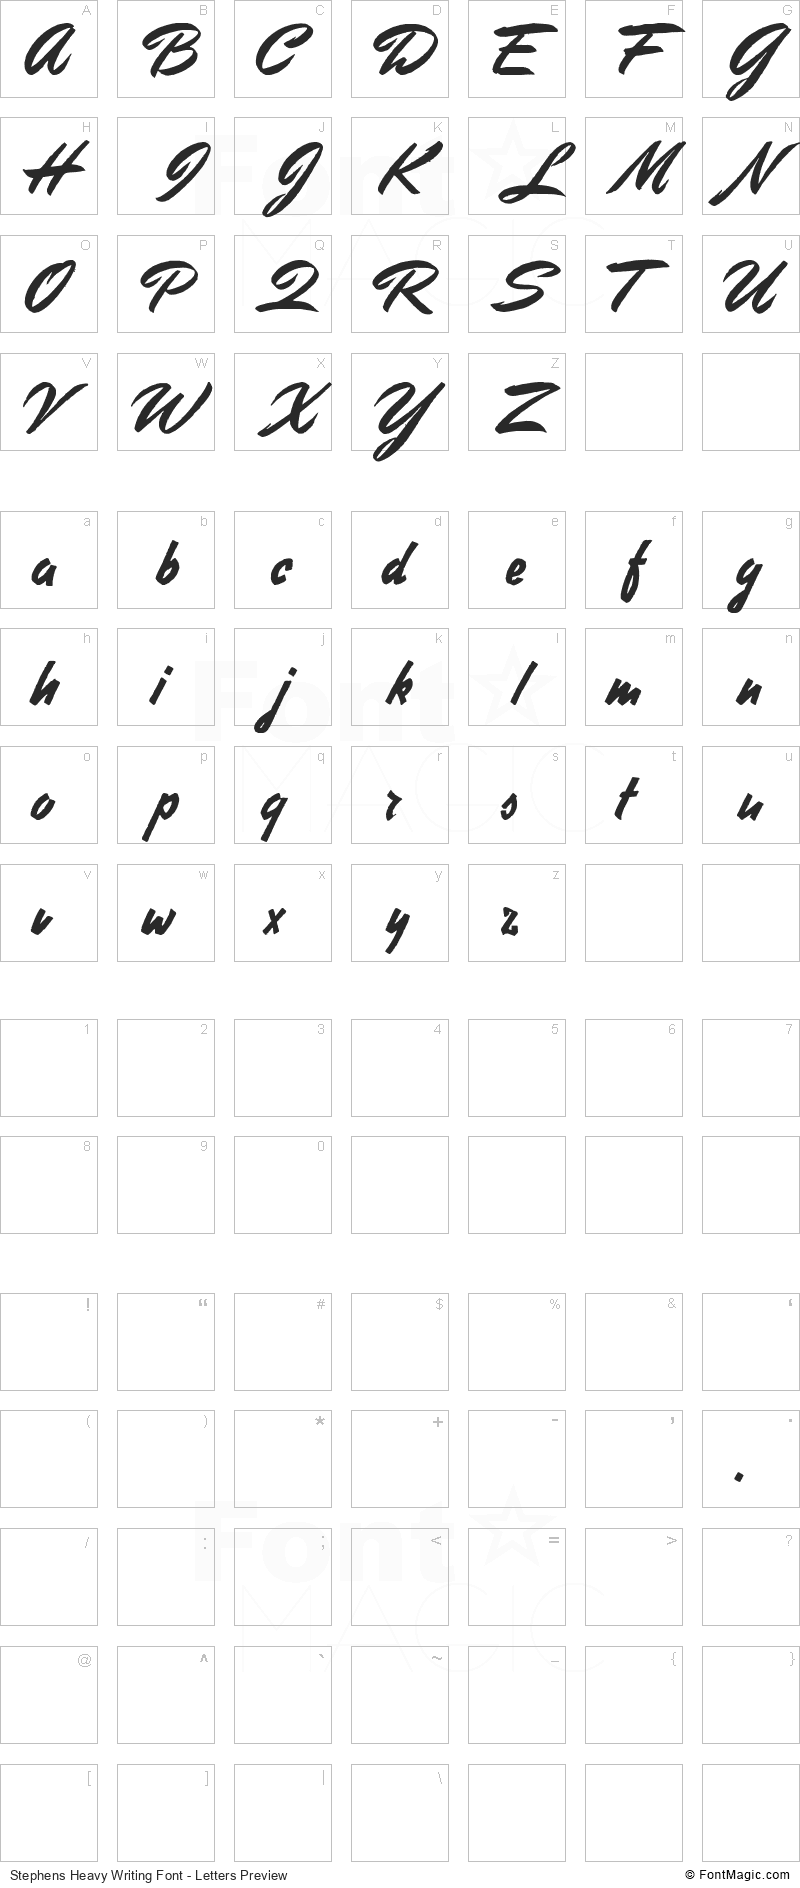 Stephens Heavy Writing Font - All Latters Preview Chart